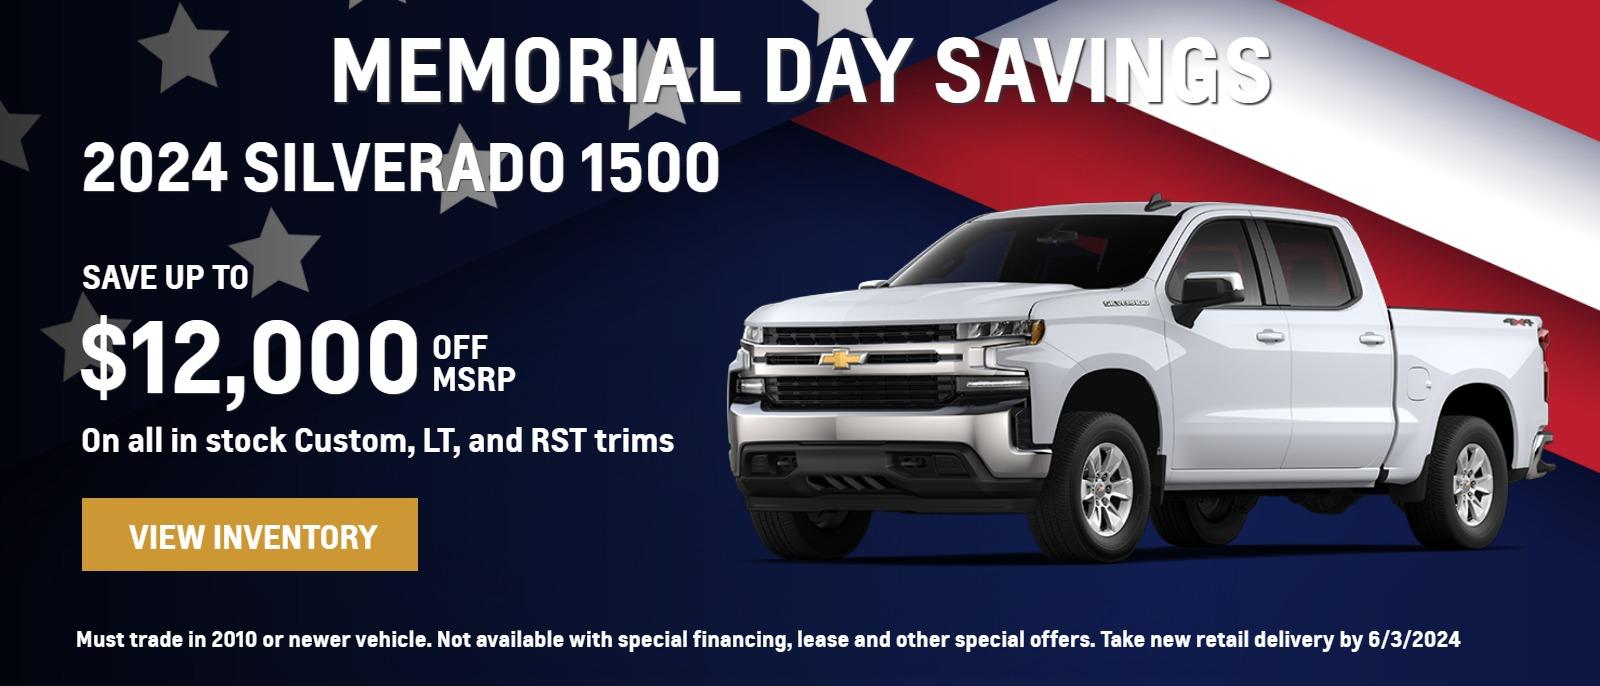 MEMORIAL DAY SAVINGS 2024 SILVERADO 1500 SAVE UP TO $12,000 OFF MSRP On all in stock Custom, LT, and RST trims Must trade in 2010 or newer vehicle. Not available with special financing, lease and other special offers. Take new retail delivery by 6/3/2024